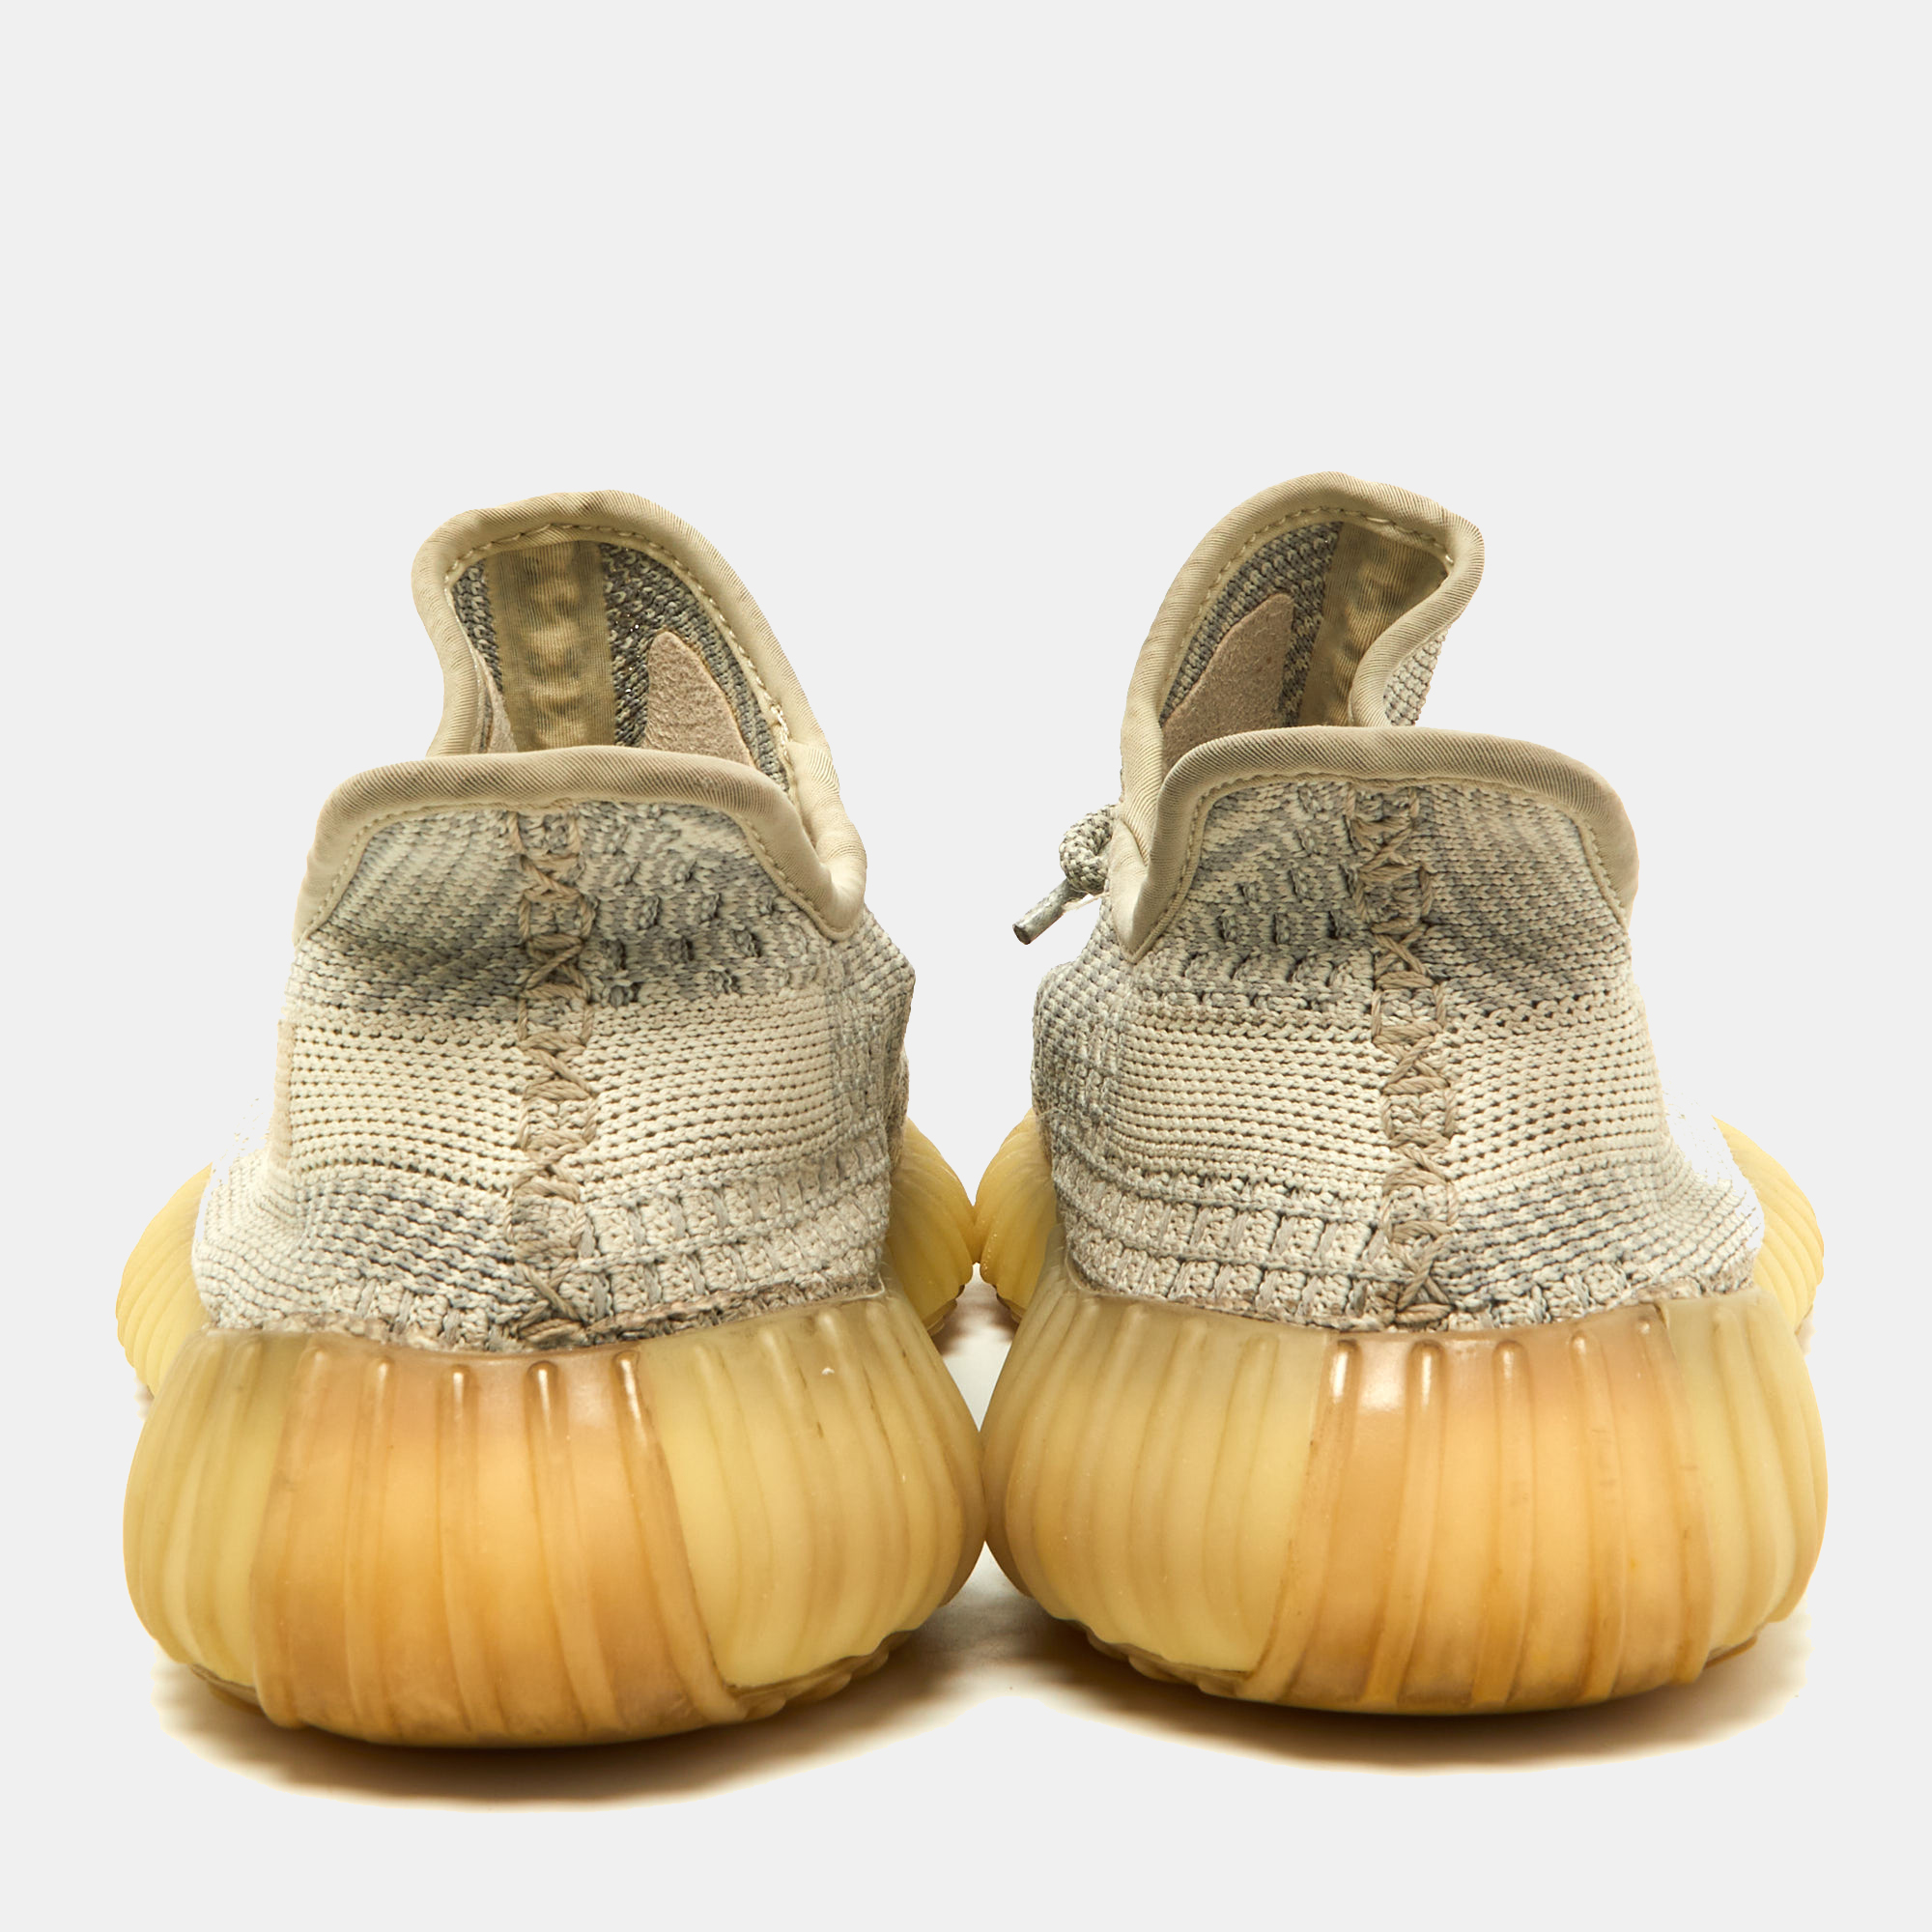 Yeezy X Adidas Boost 350 V2 Lundmark Non-Reflective Sneakers Size 38